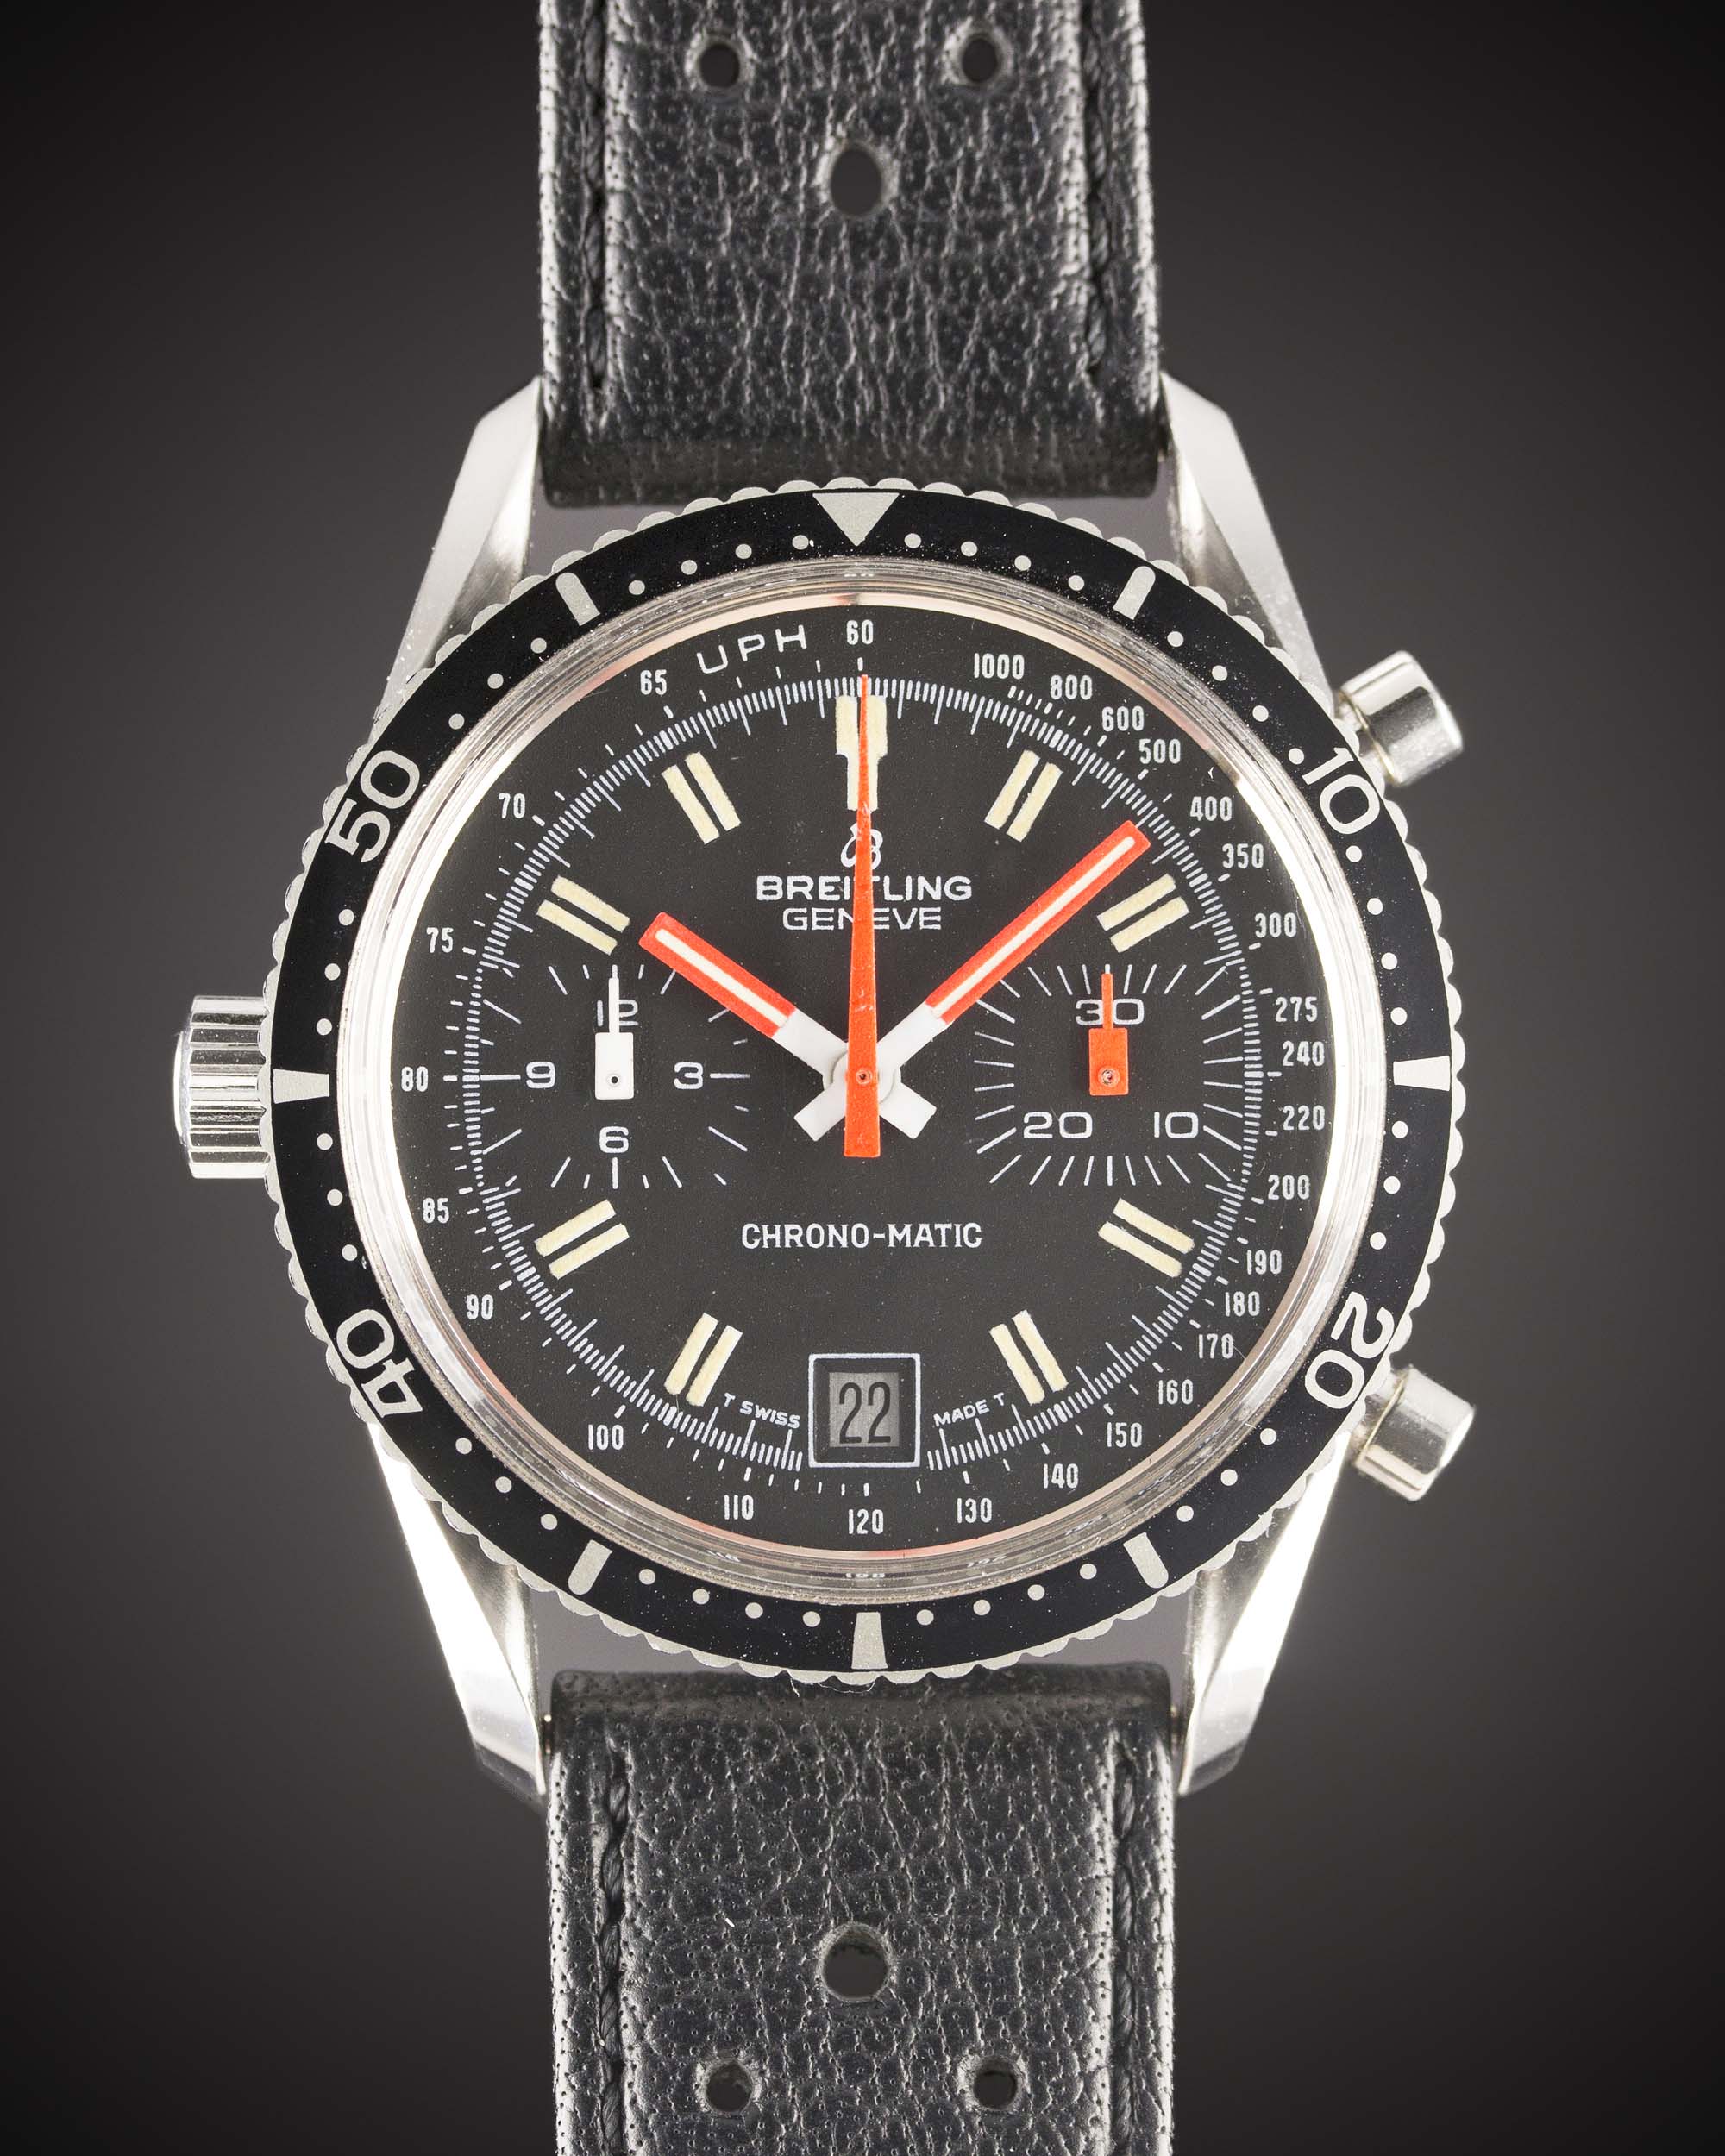 A RARE GENTLEMAN'S STAINLESS STEEL BREITLING CHRONO-MATIC CHRONOGRAPH WRIST WATCH CIRCA 1977, REF. - Image 2 of 12